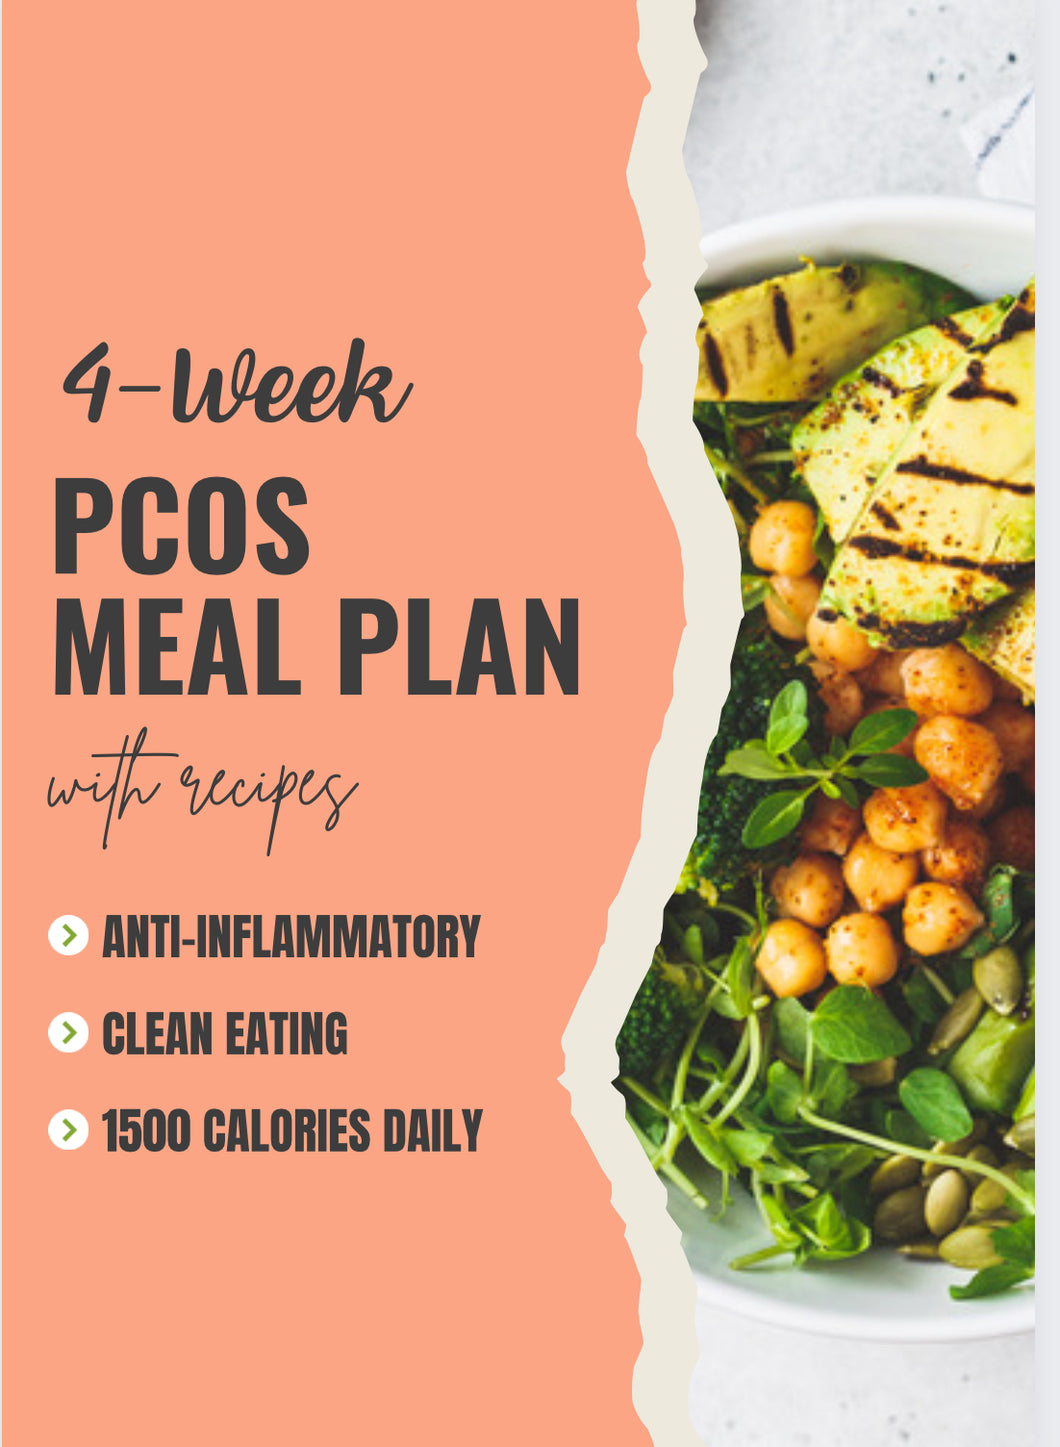 CGF PCOS Meal Guide